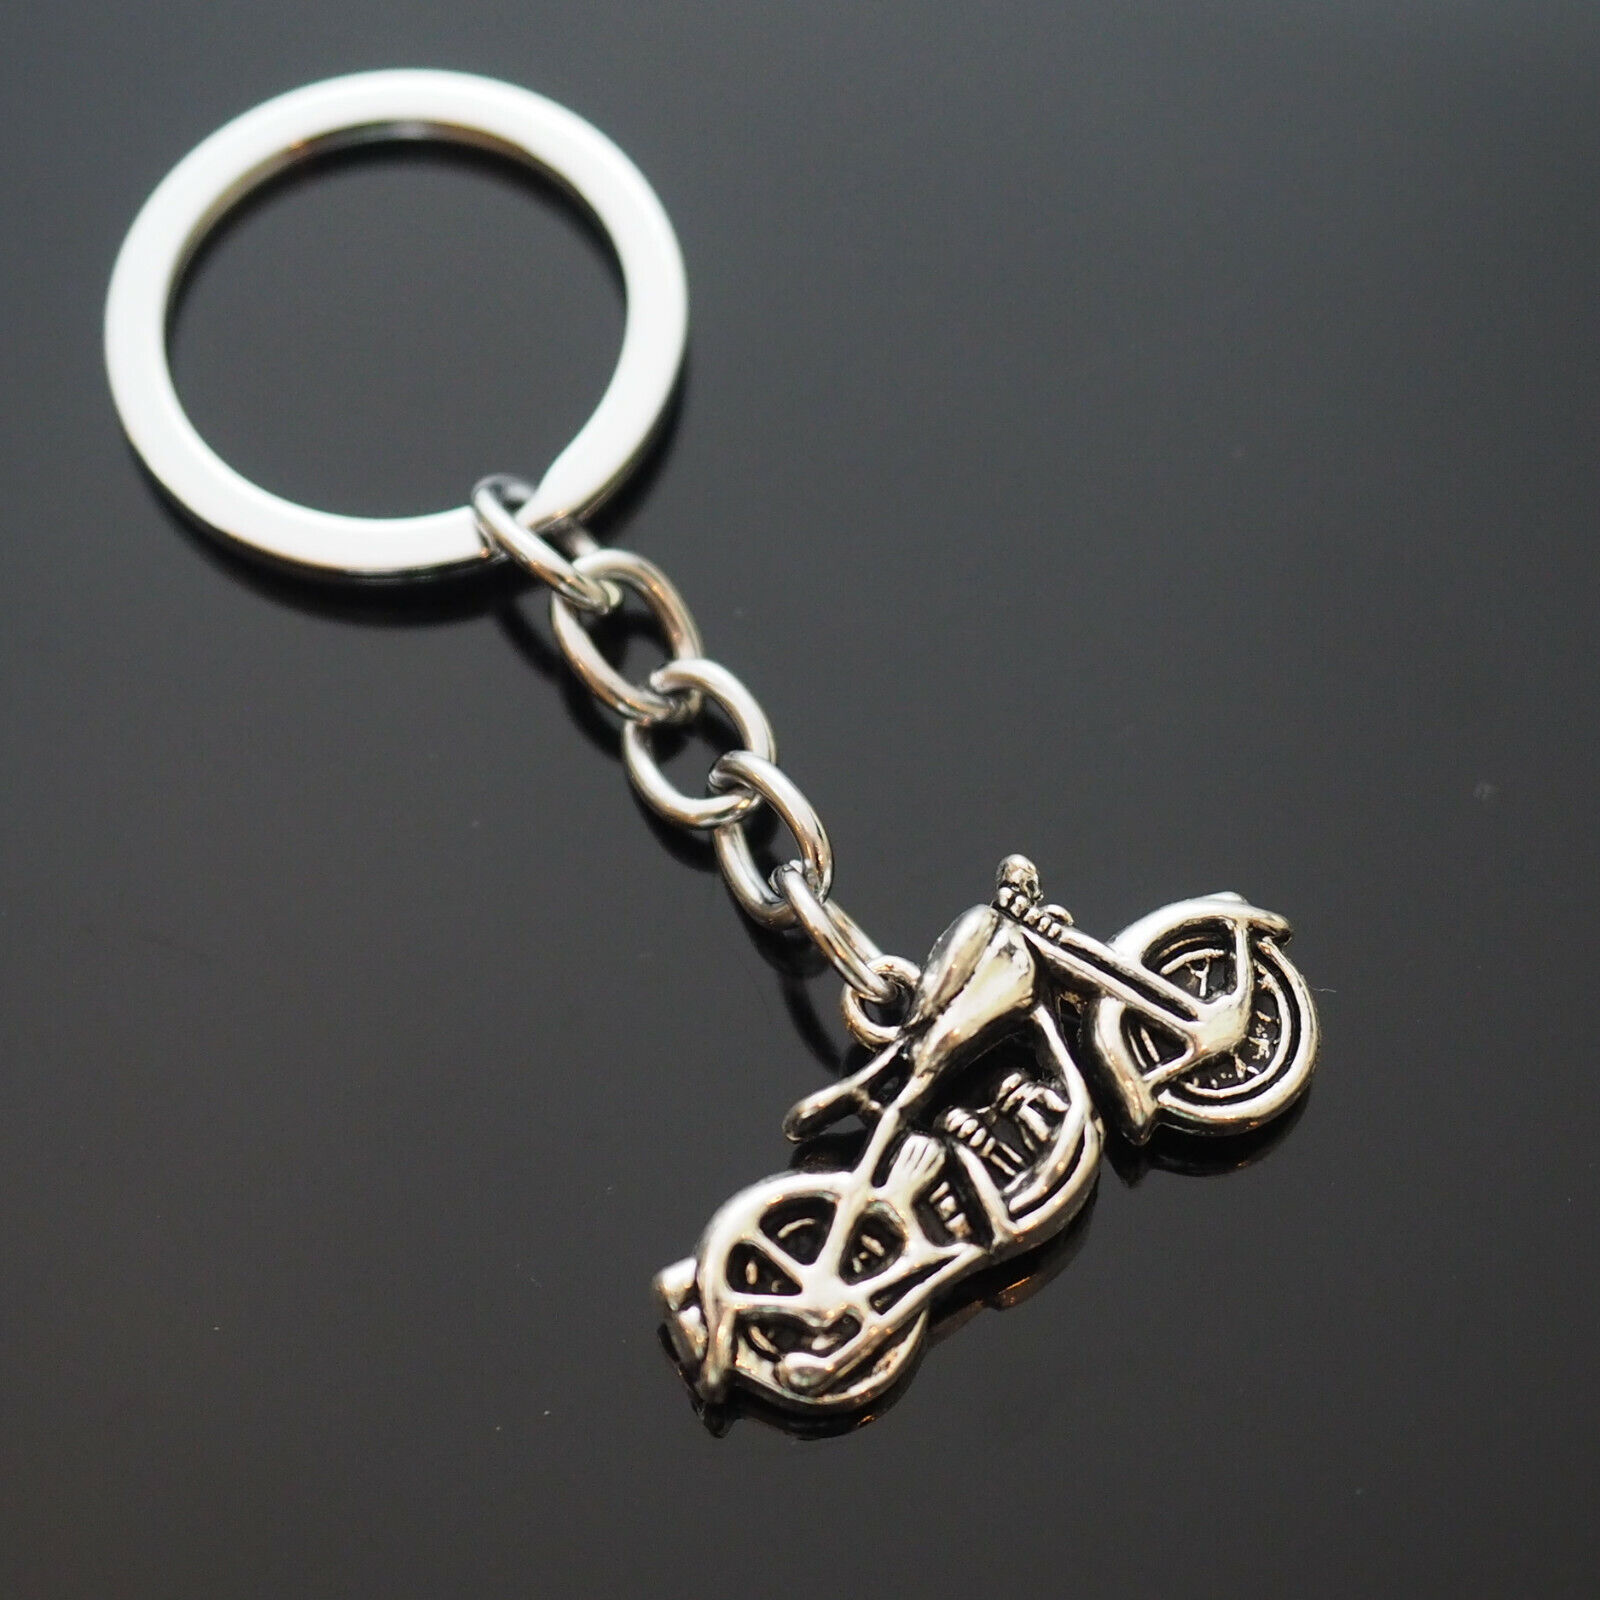 Motorcycle Key Chain Silver Pendant Charm Classic Antique Vintage Look Keychain